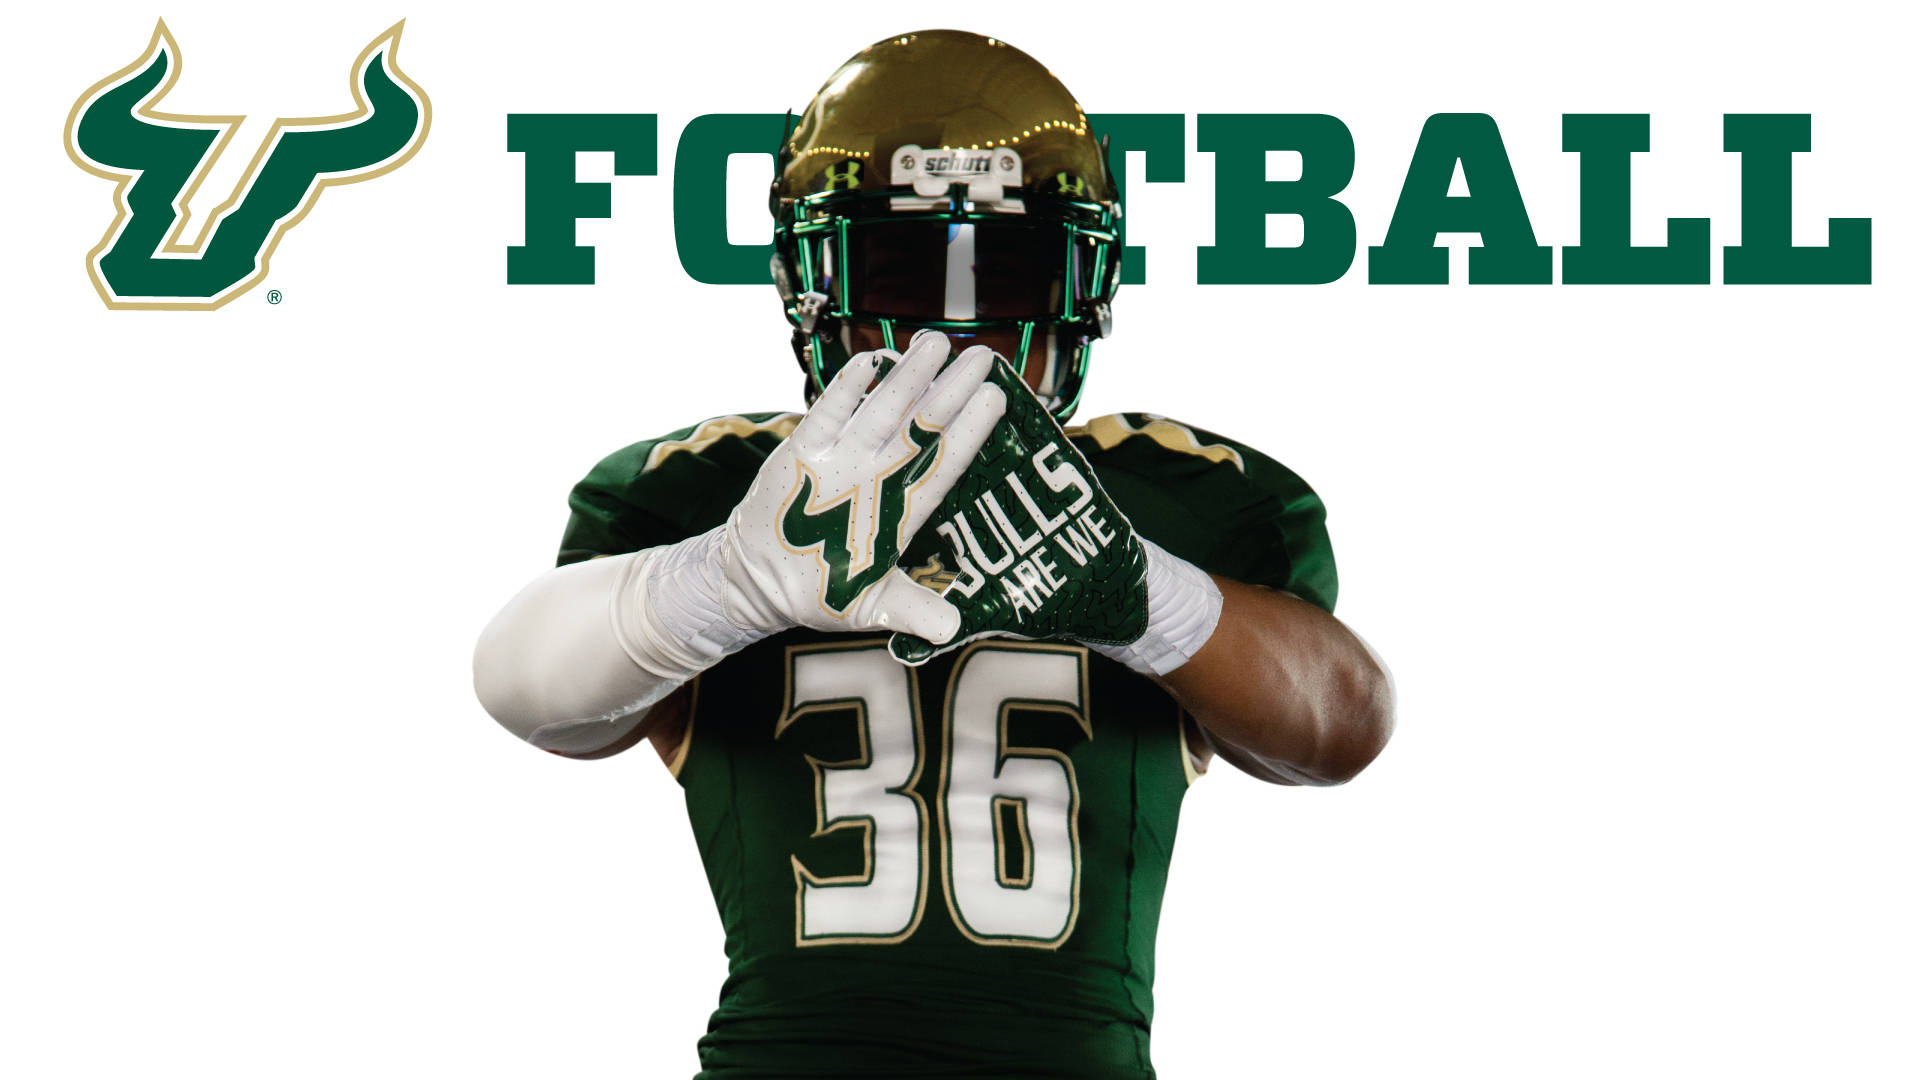  comOfficial Athletics Web Site of the University of South Florida